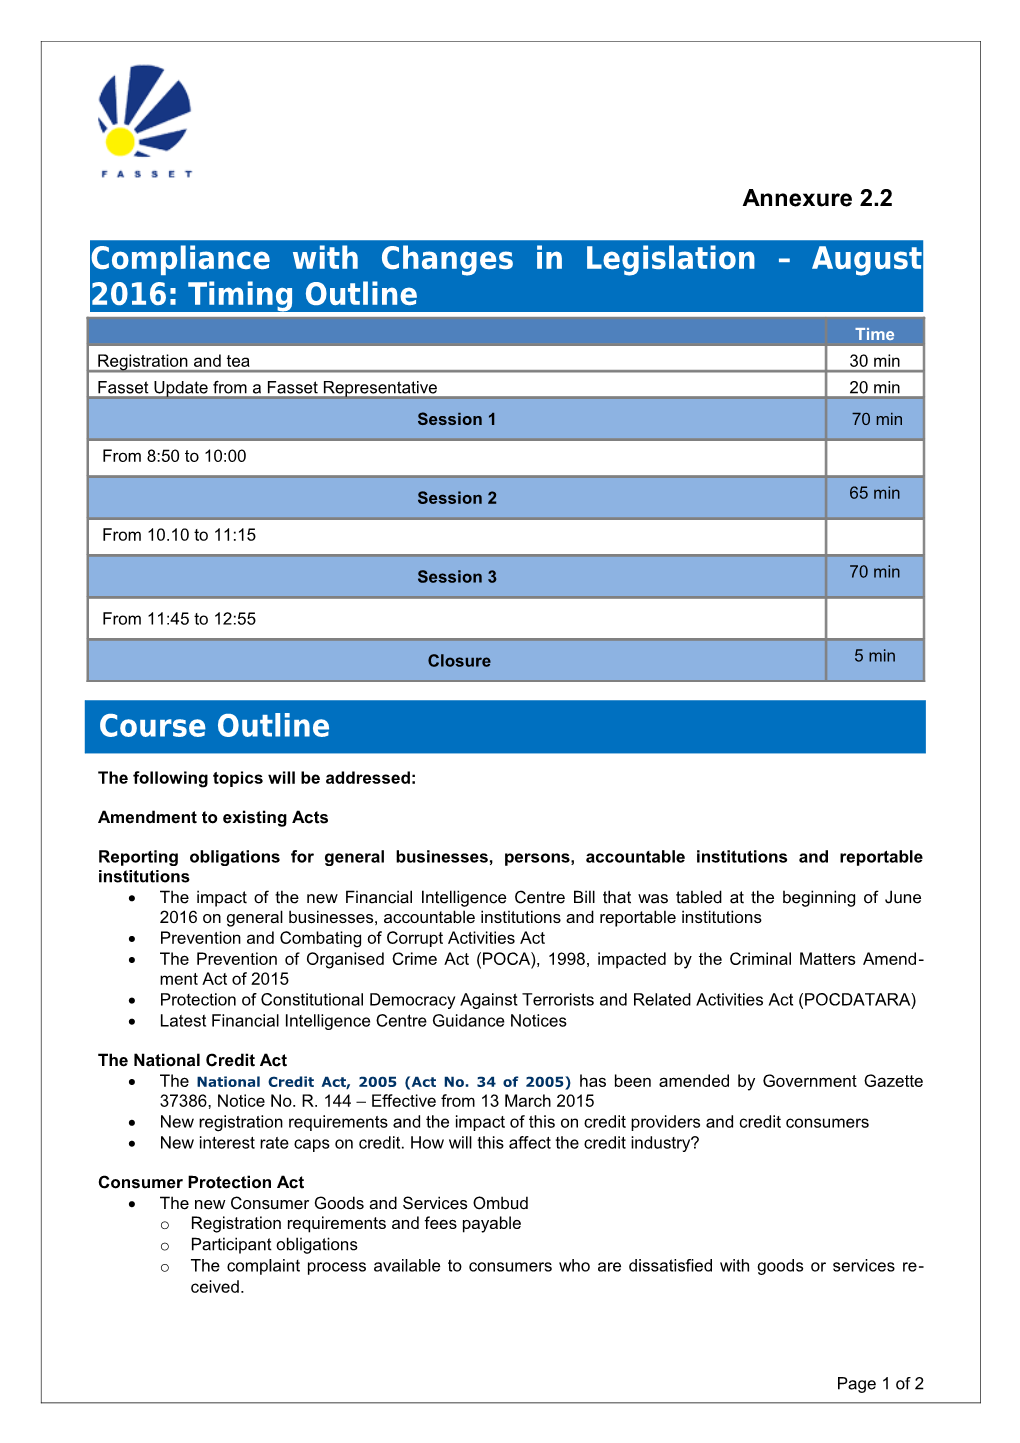 Compliance with Changes in Legislation August 2016:Timing Outline